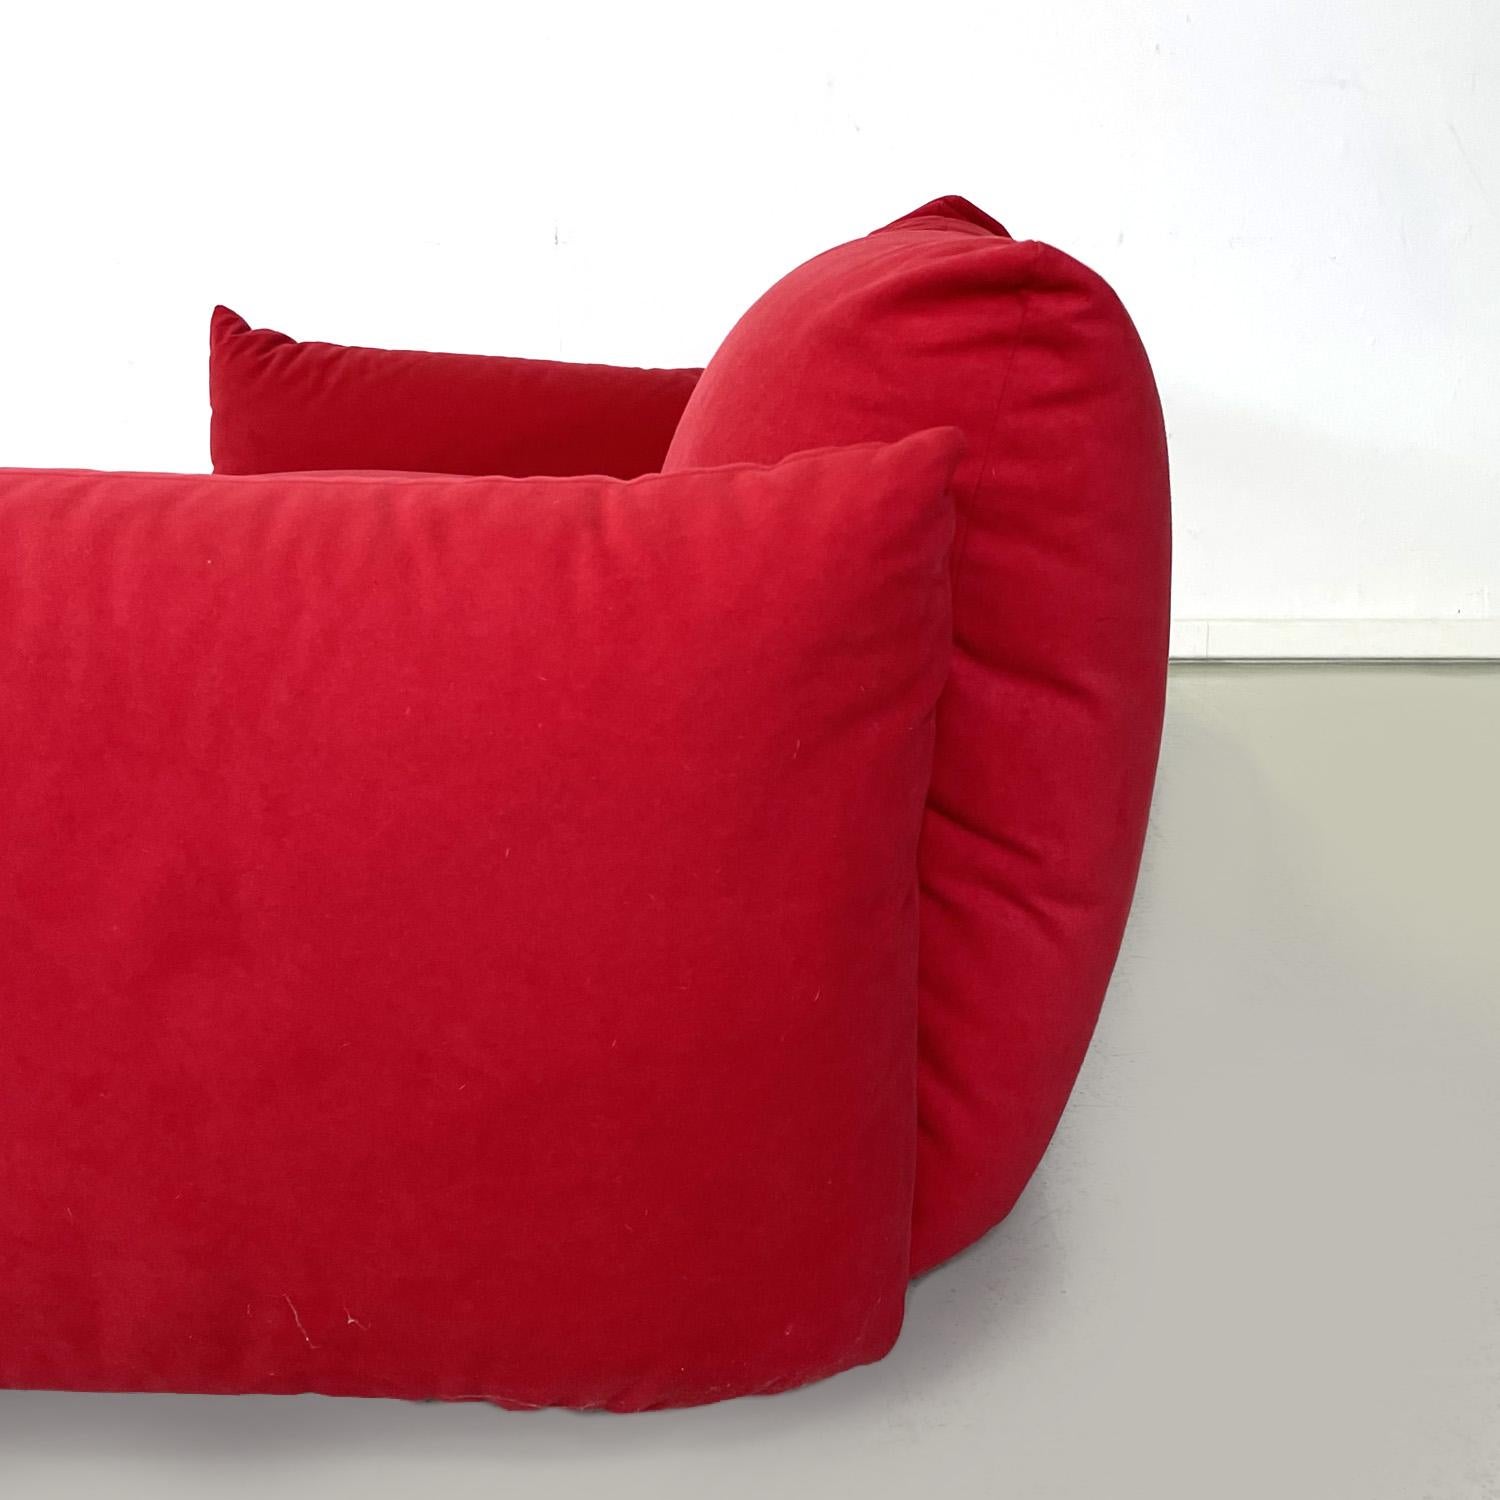 Late 20th Century Italian modern red armchair Marenco by Mario Marenco for Arflex, 1970s For Sale